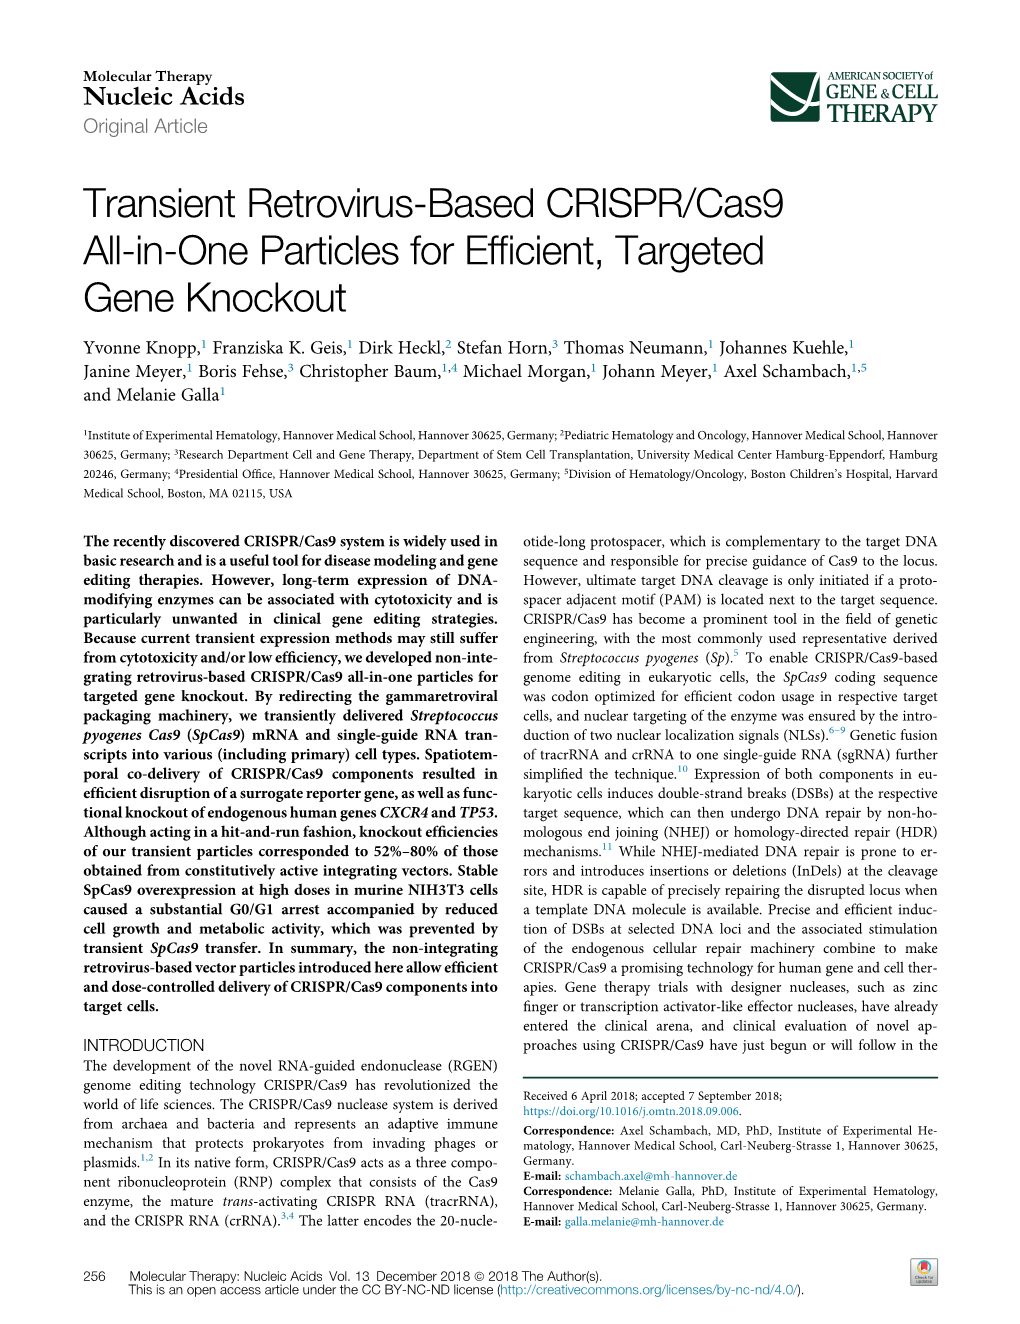 Transient Retrovirus-Based CRISPR/Cas9 All-In-One Particles for Efficient, Targeted Gene Knockout